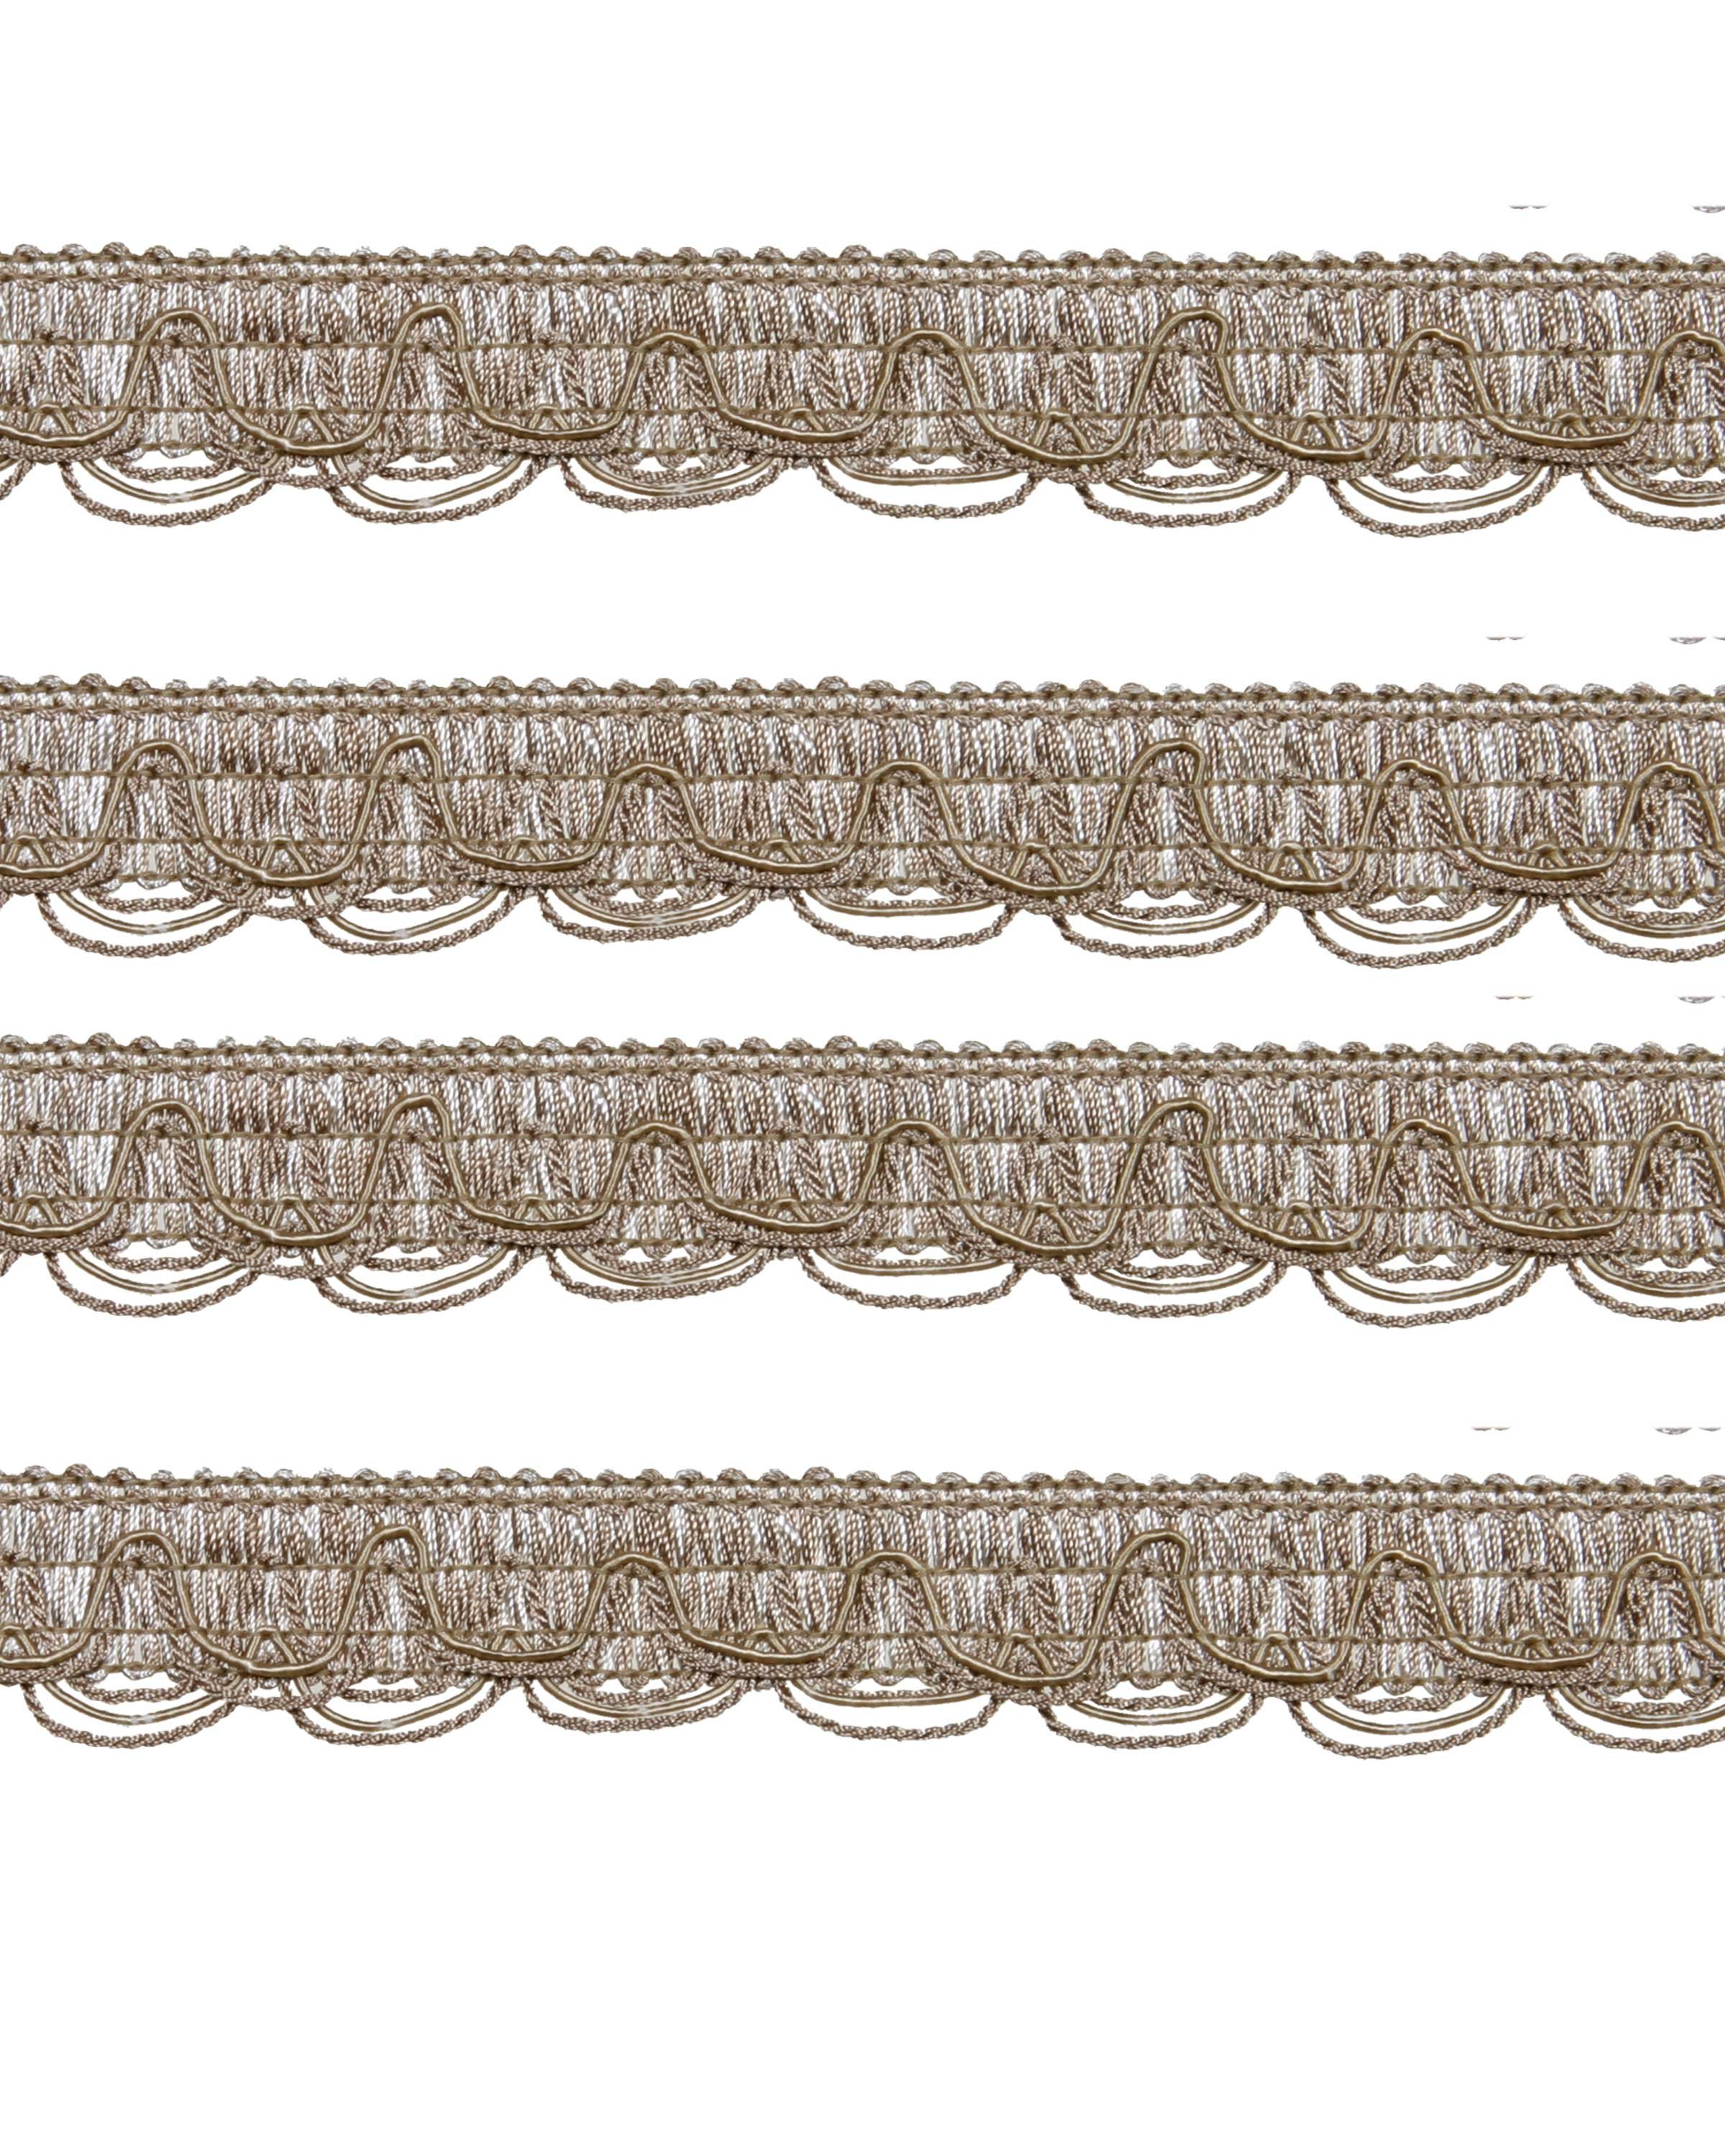 Scalloped Looped Braid - Beige 28mm Price is for 5 metres